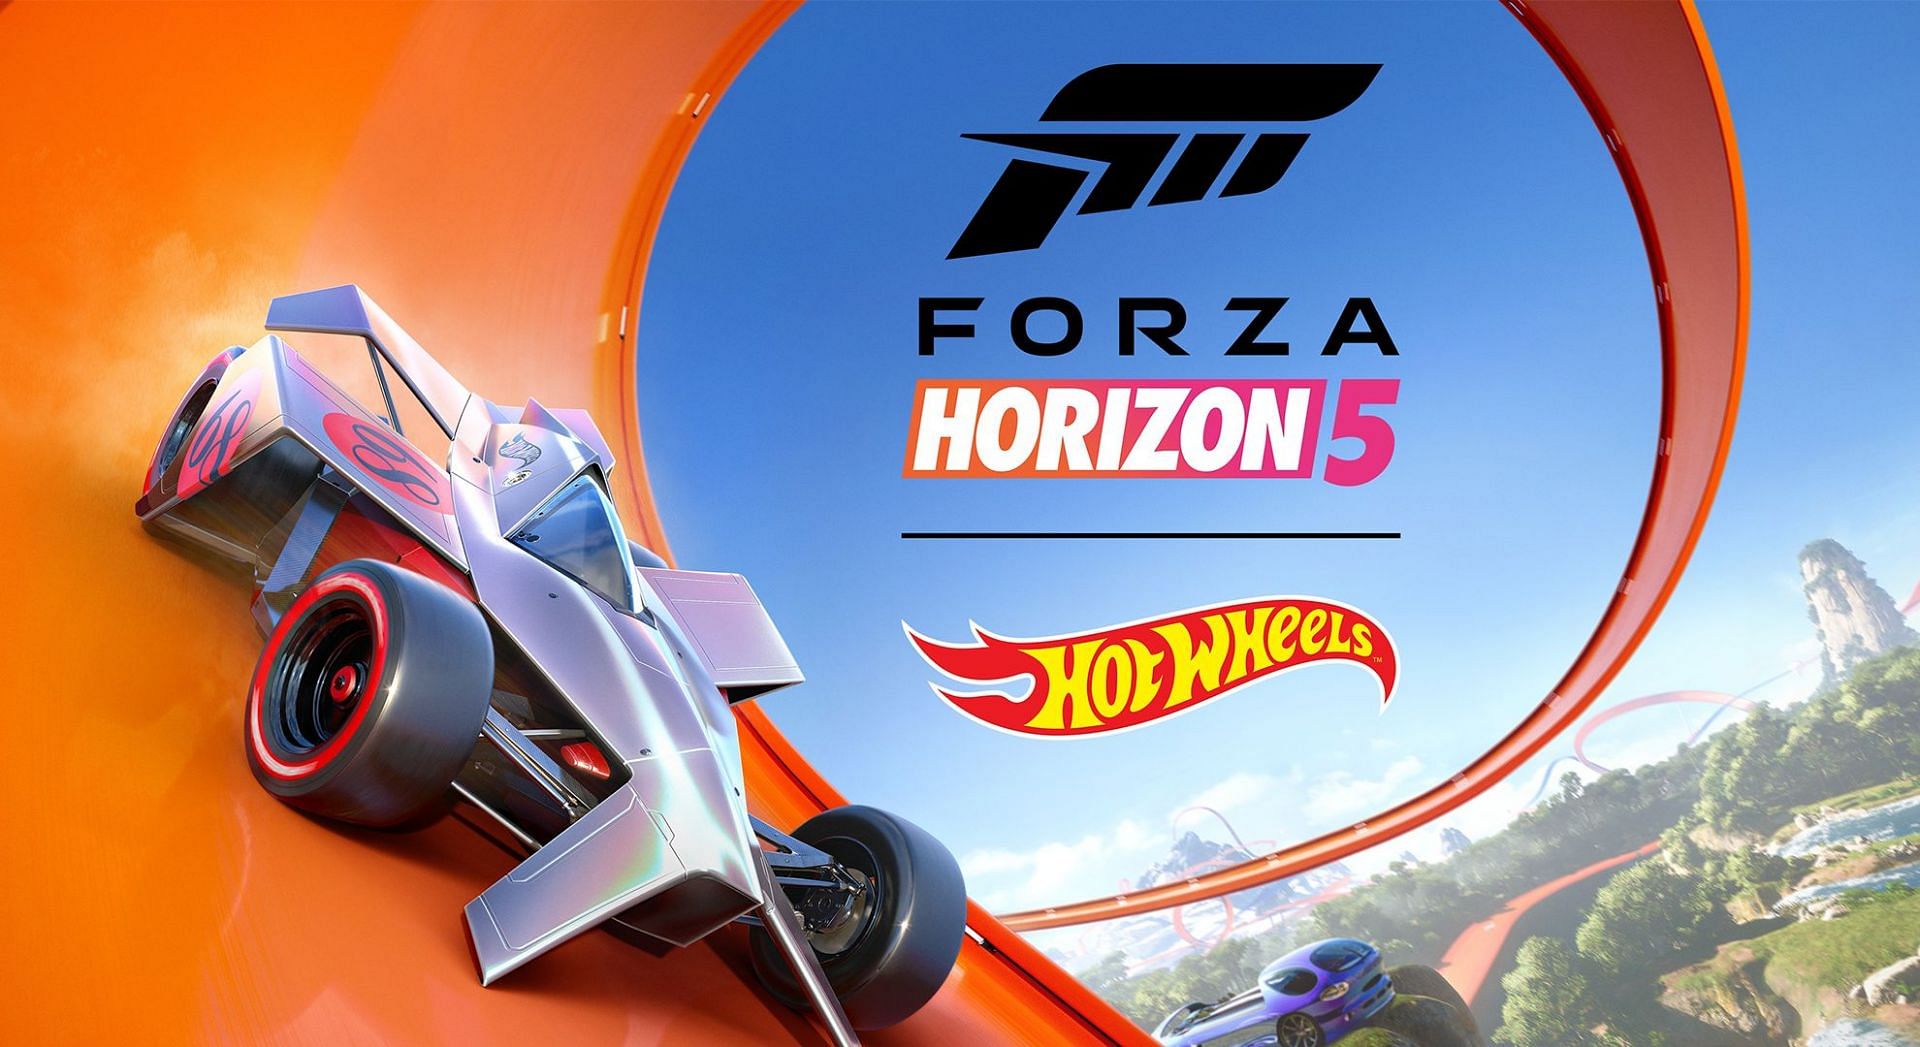 New cars will be arriving with Forza Horizon 5&#039;s Hot Wheels expansion pack (Image via Xbox)